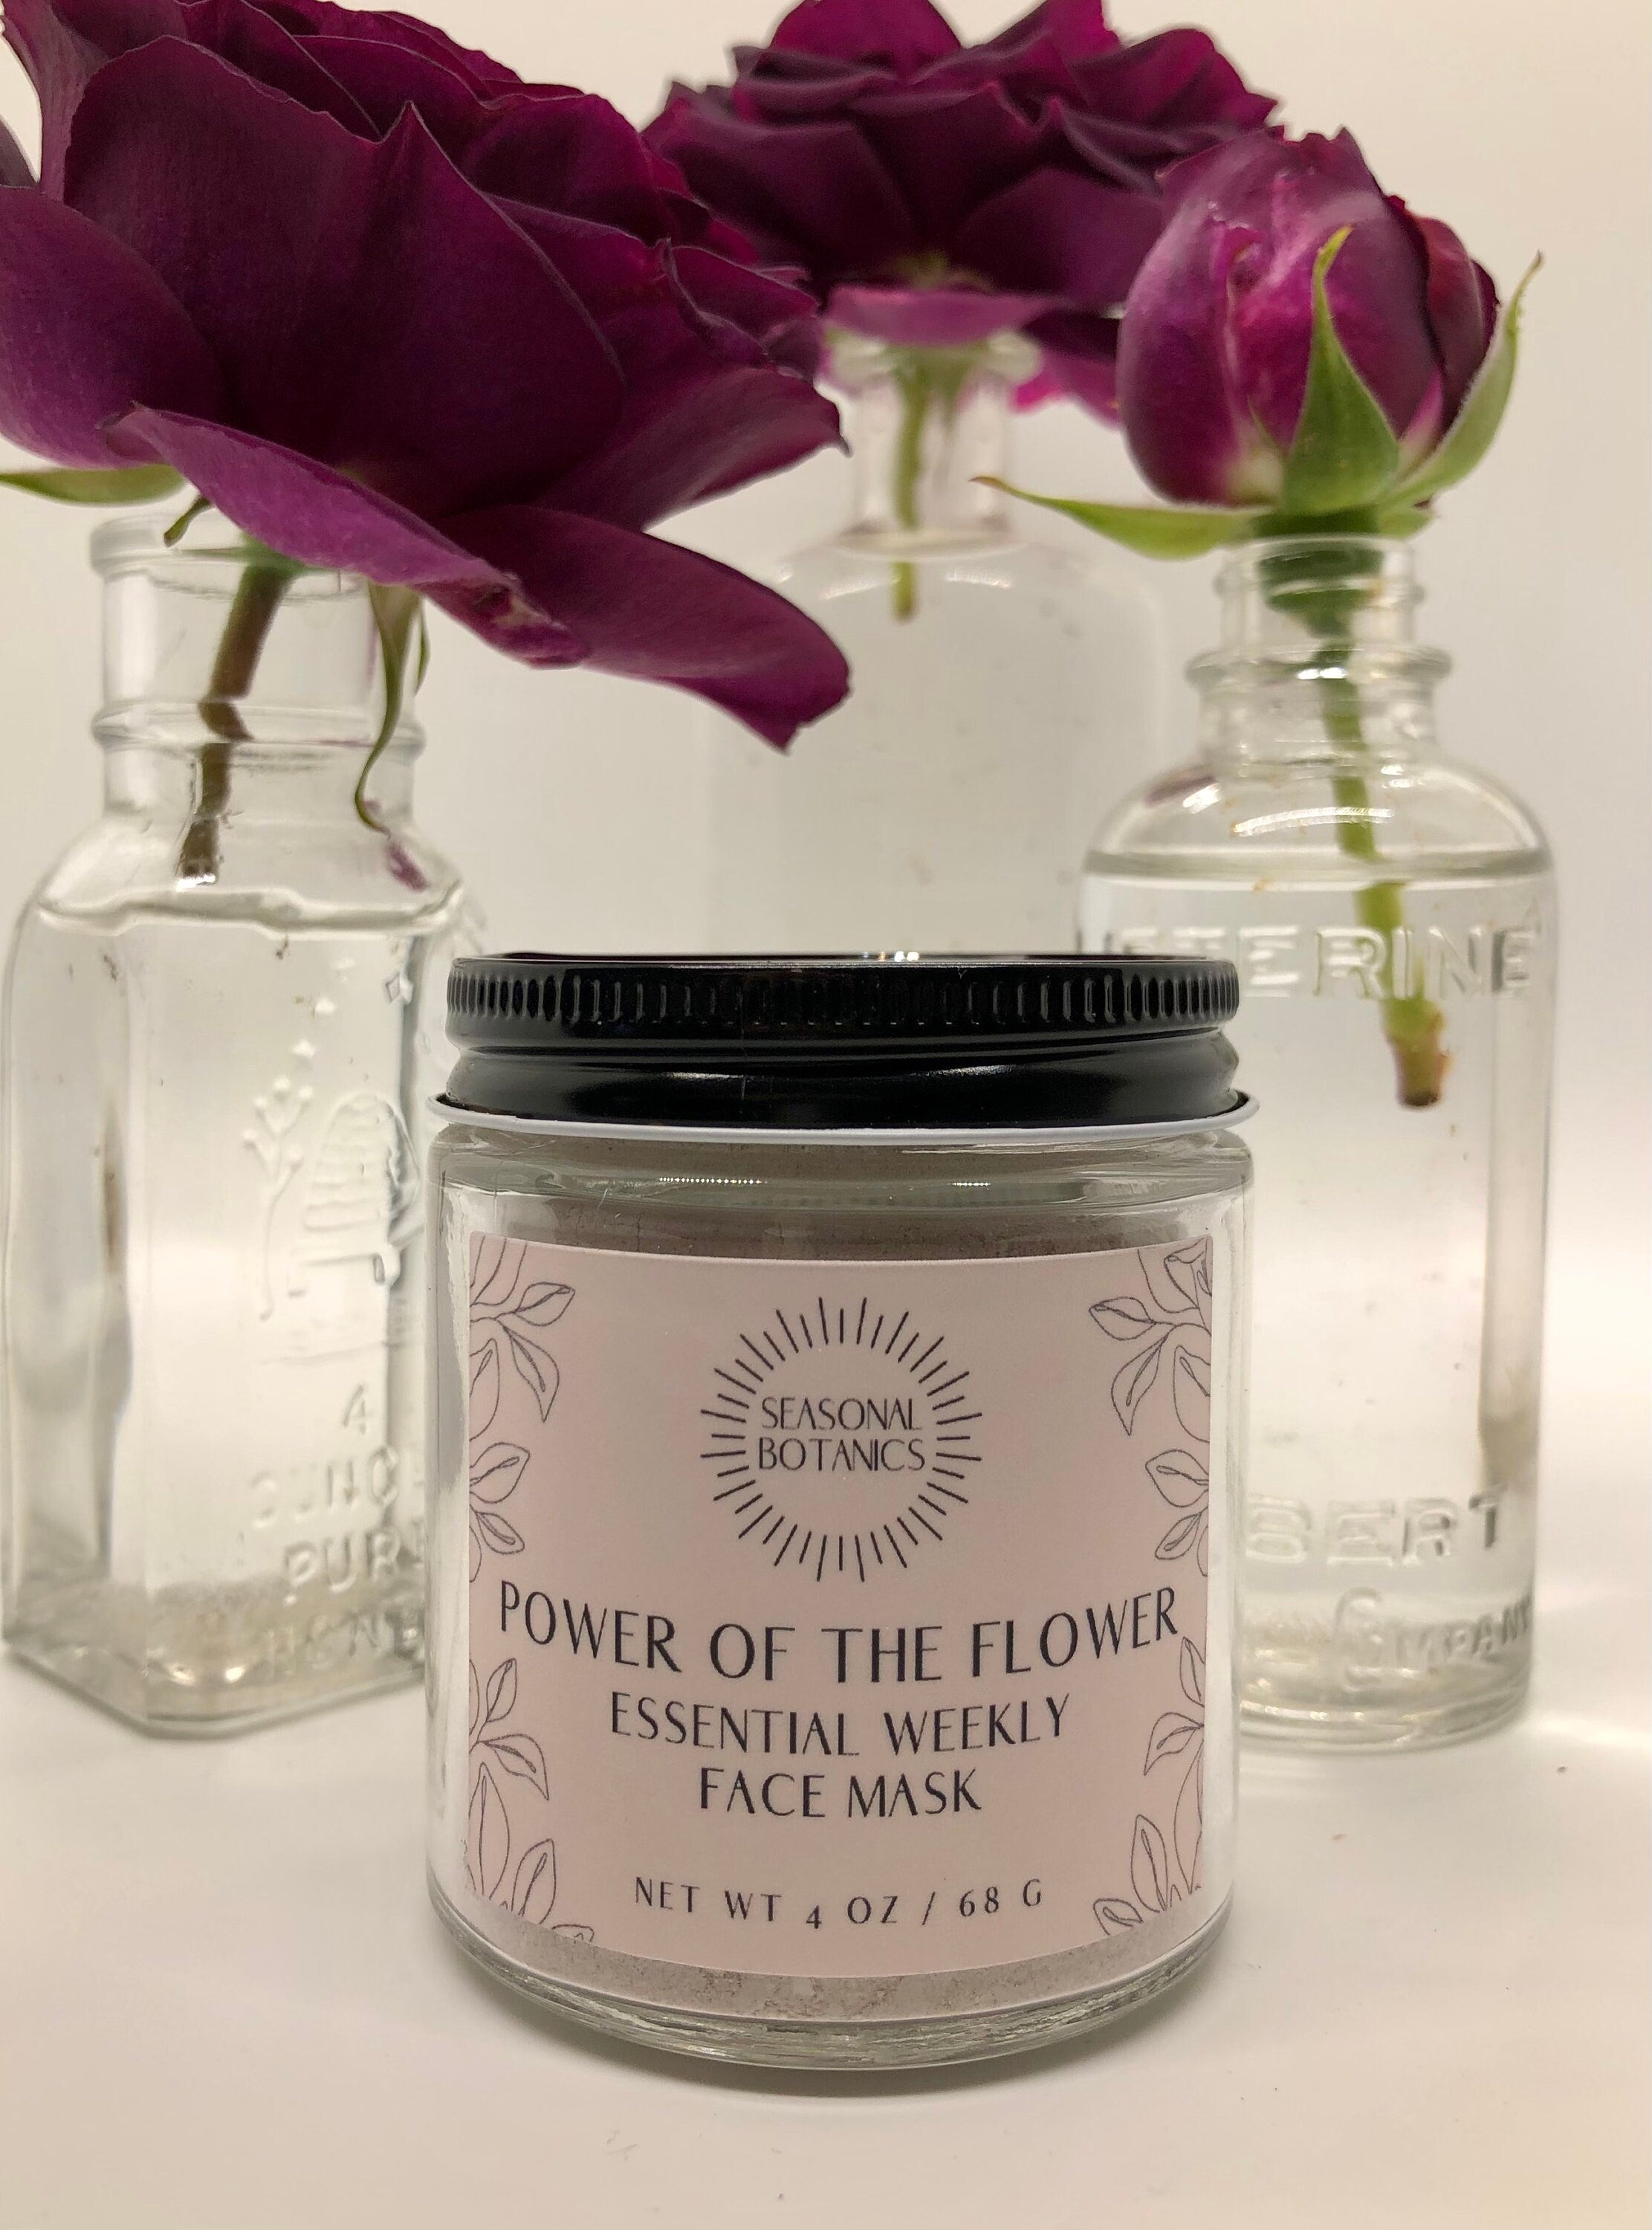 Power of the flower face mask treatment ~ Clay mask, all skin types, antioxidant mask, clear skin, organic & natural skincare